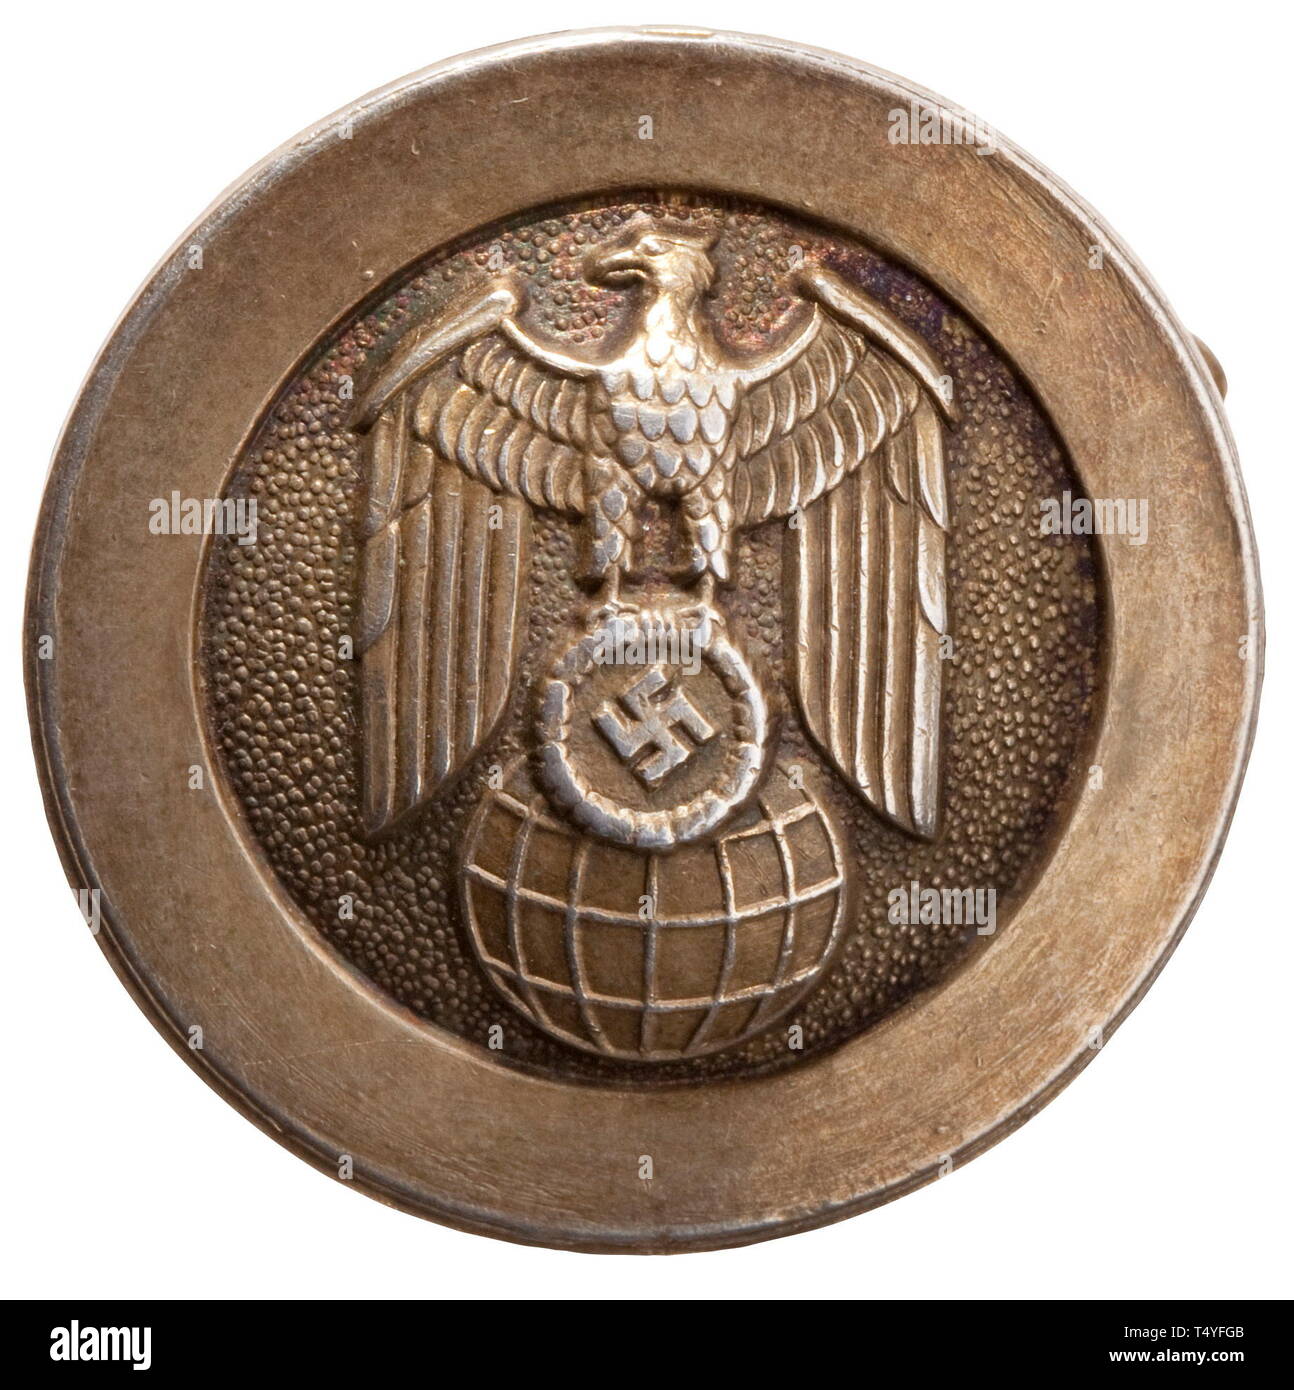 Andor Hencke (1895 - 1984) - Badge No. 1711 of the Foreign Office. Silvered non-ferrous metal, obverse national emblem of the Foreign Office, reverse attachment pin and struck number '1711'. Diameter 2.8 cm. An extremely rare badge with provenance. Cf. also the preceding lot, the documents from Hencke's estate. historic, historical, diplomacy, organisation, organization, organizations, organisations, Diplomatic service, foreign policy, Diplomatic services, object, objects, stills, clipping, cut out, cut-out, cut-outs, 20th century, Additional-Rights-Clearance-Info-Not-Available Stock Photo